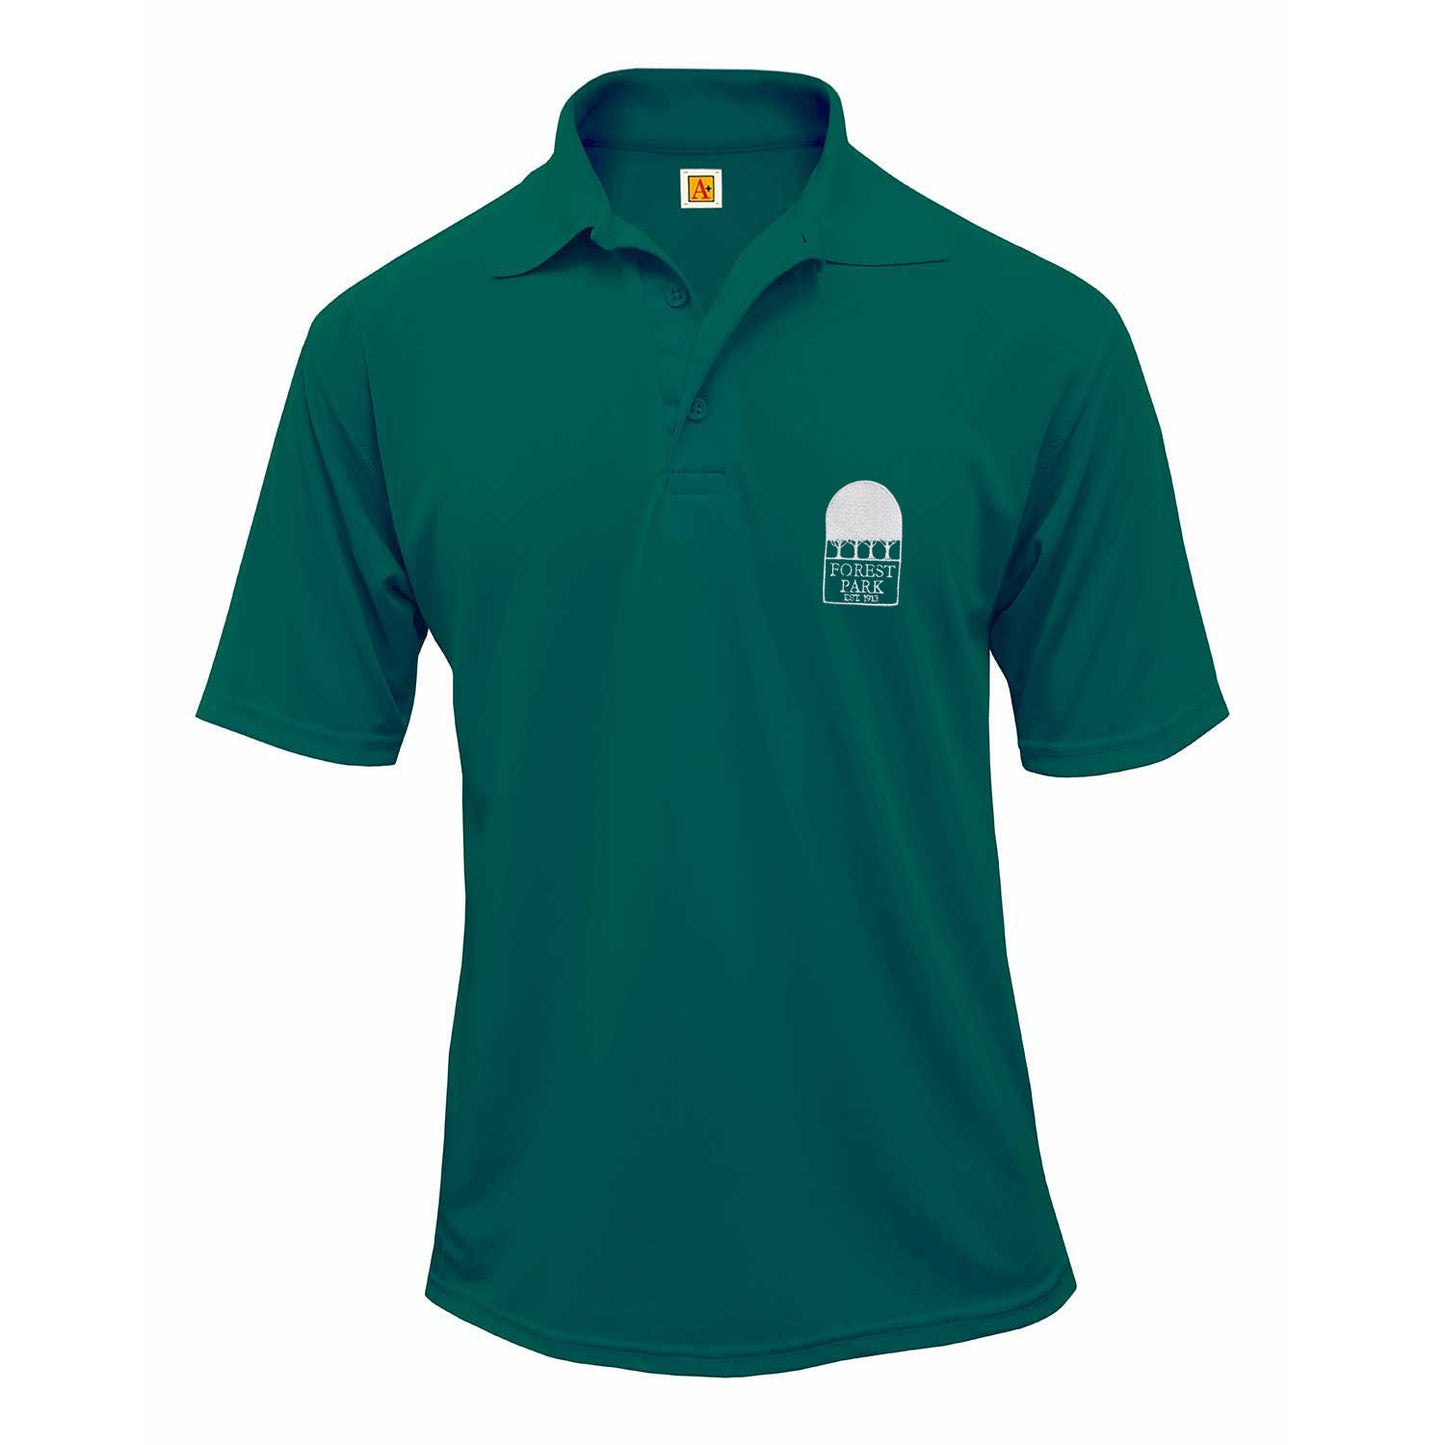 Youth Short Sleeve DriFit Polo with Forest Park Logo